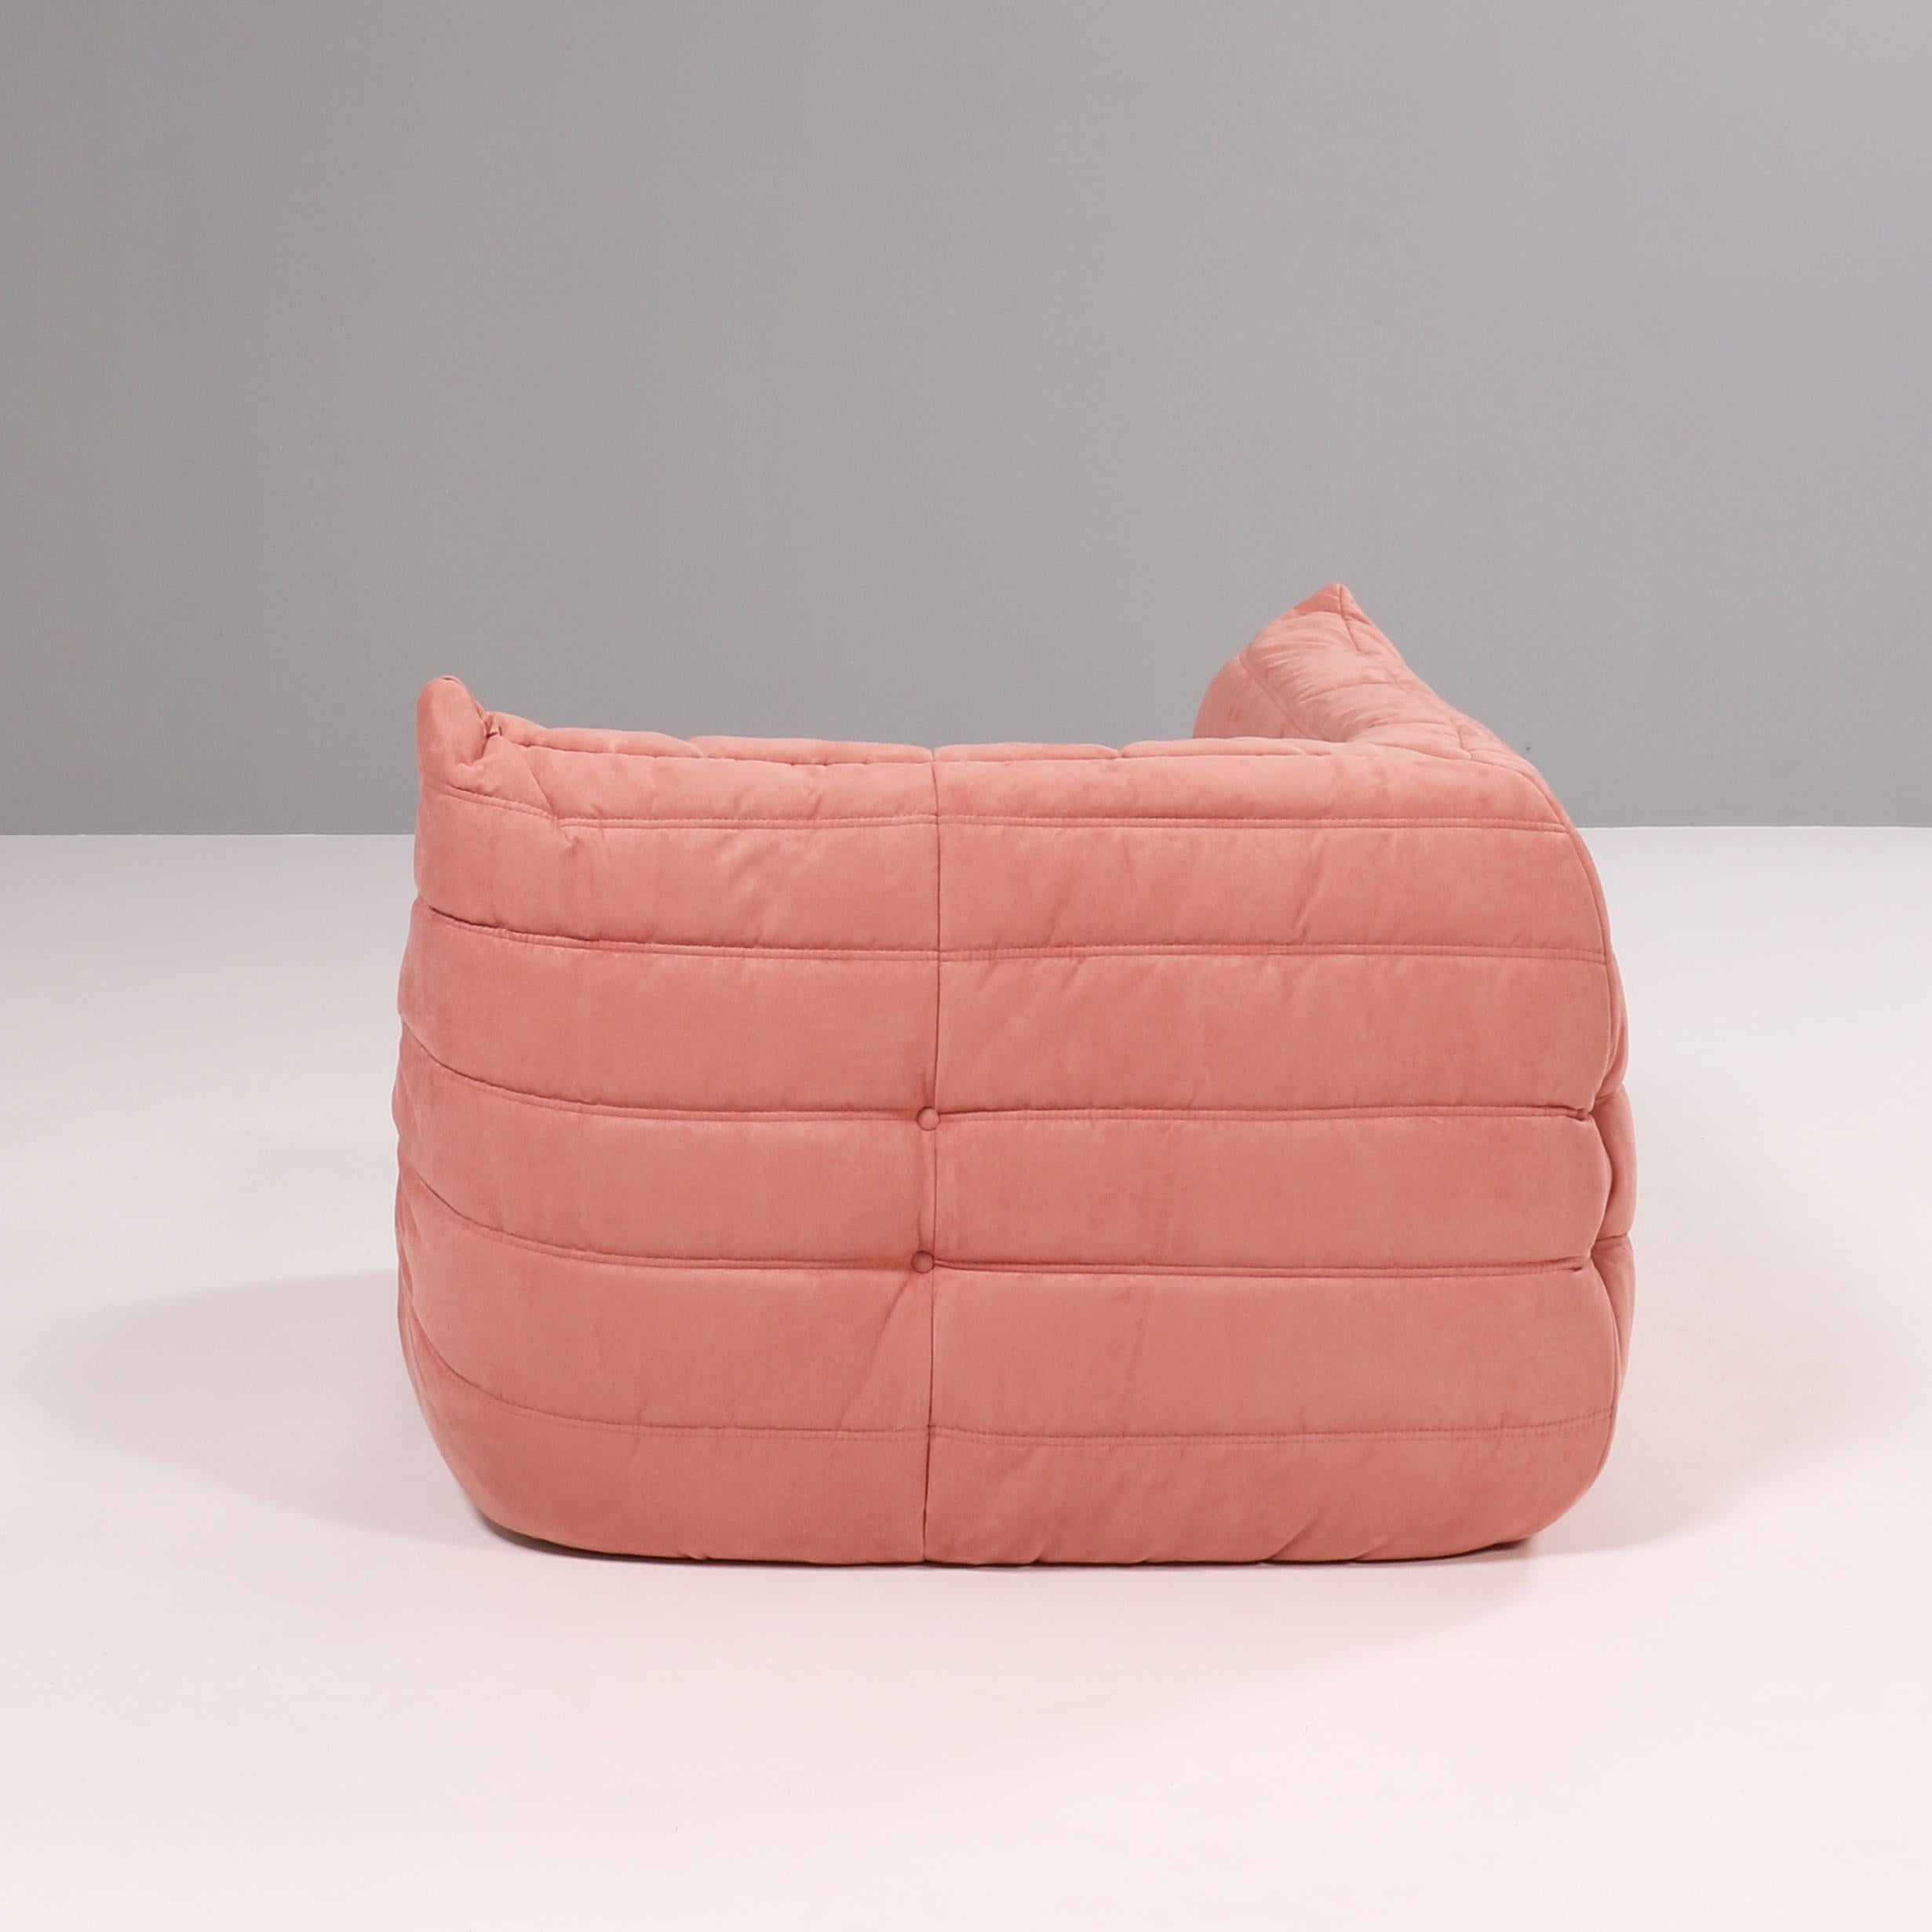 The iconic Togo sofa, originally designed by Michel Ducaroy for Ligne Roset in 1973 has become a design Classic.

The corner seat features the original pink upholstery and the instantly recognizable pleated fabric design, which gives the sofa its